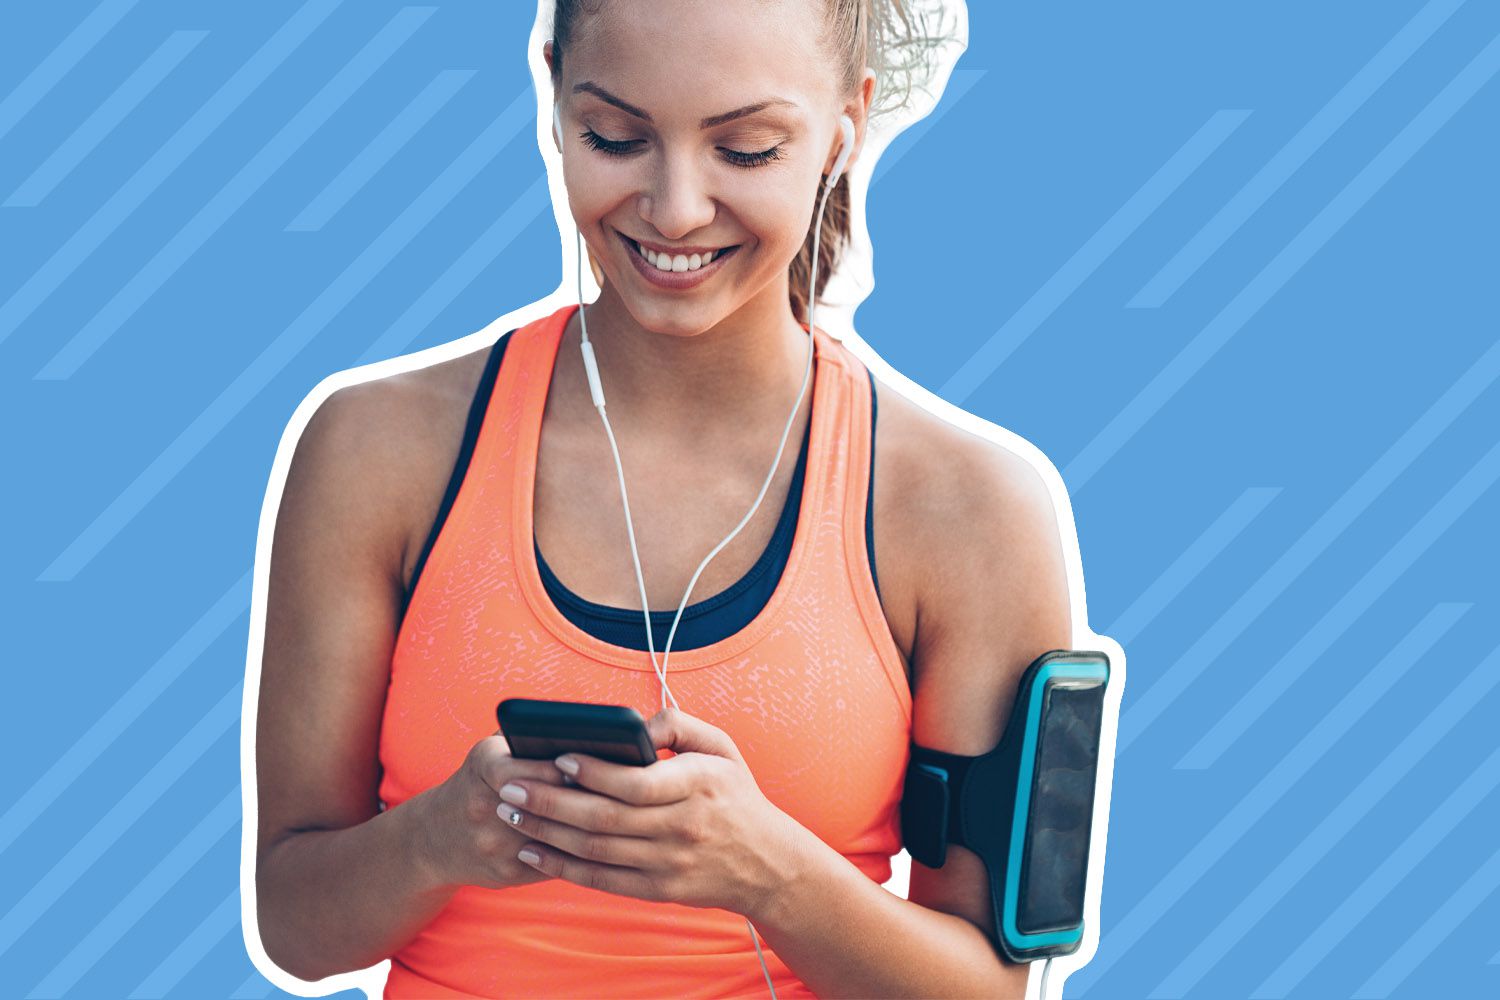 The 9 Best Running Apps of 2022